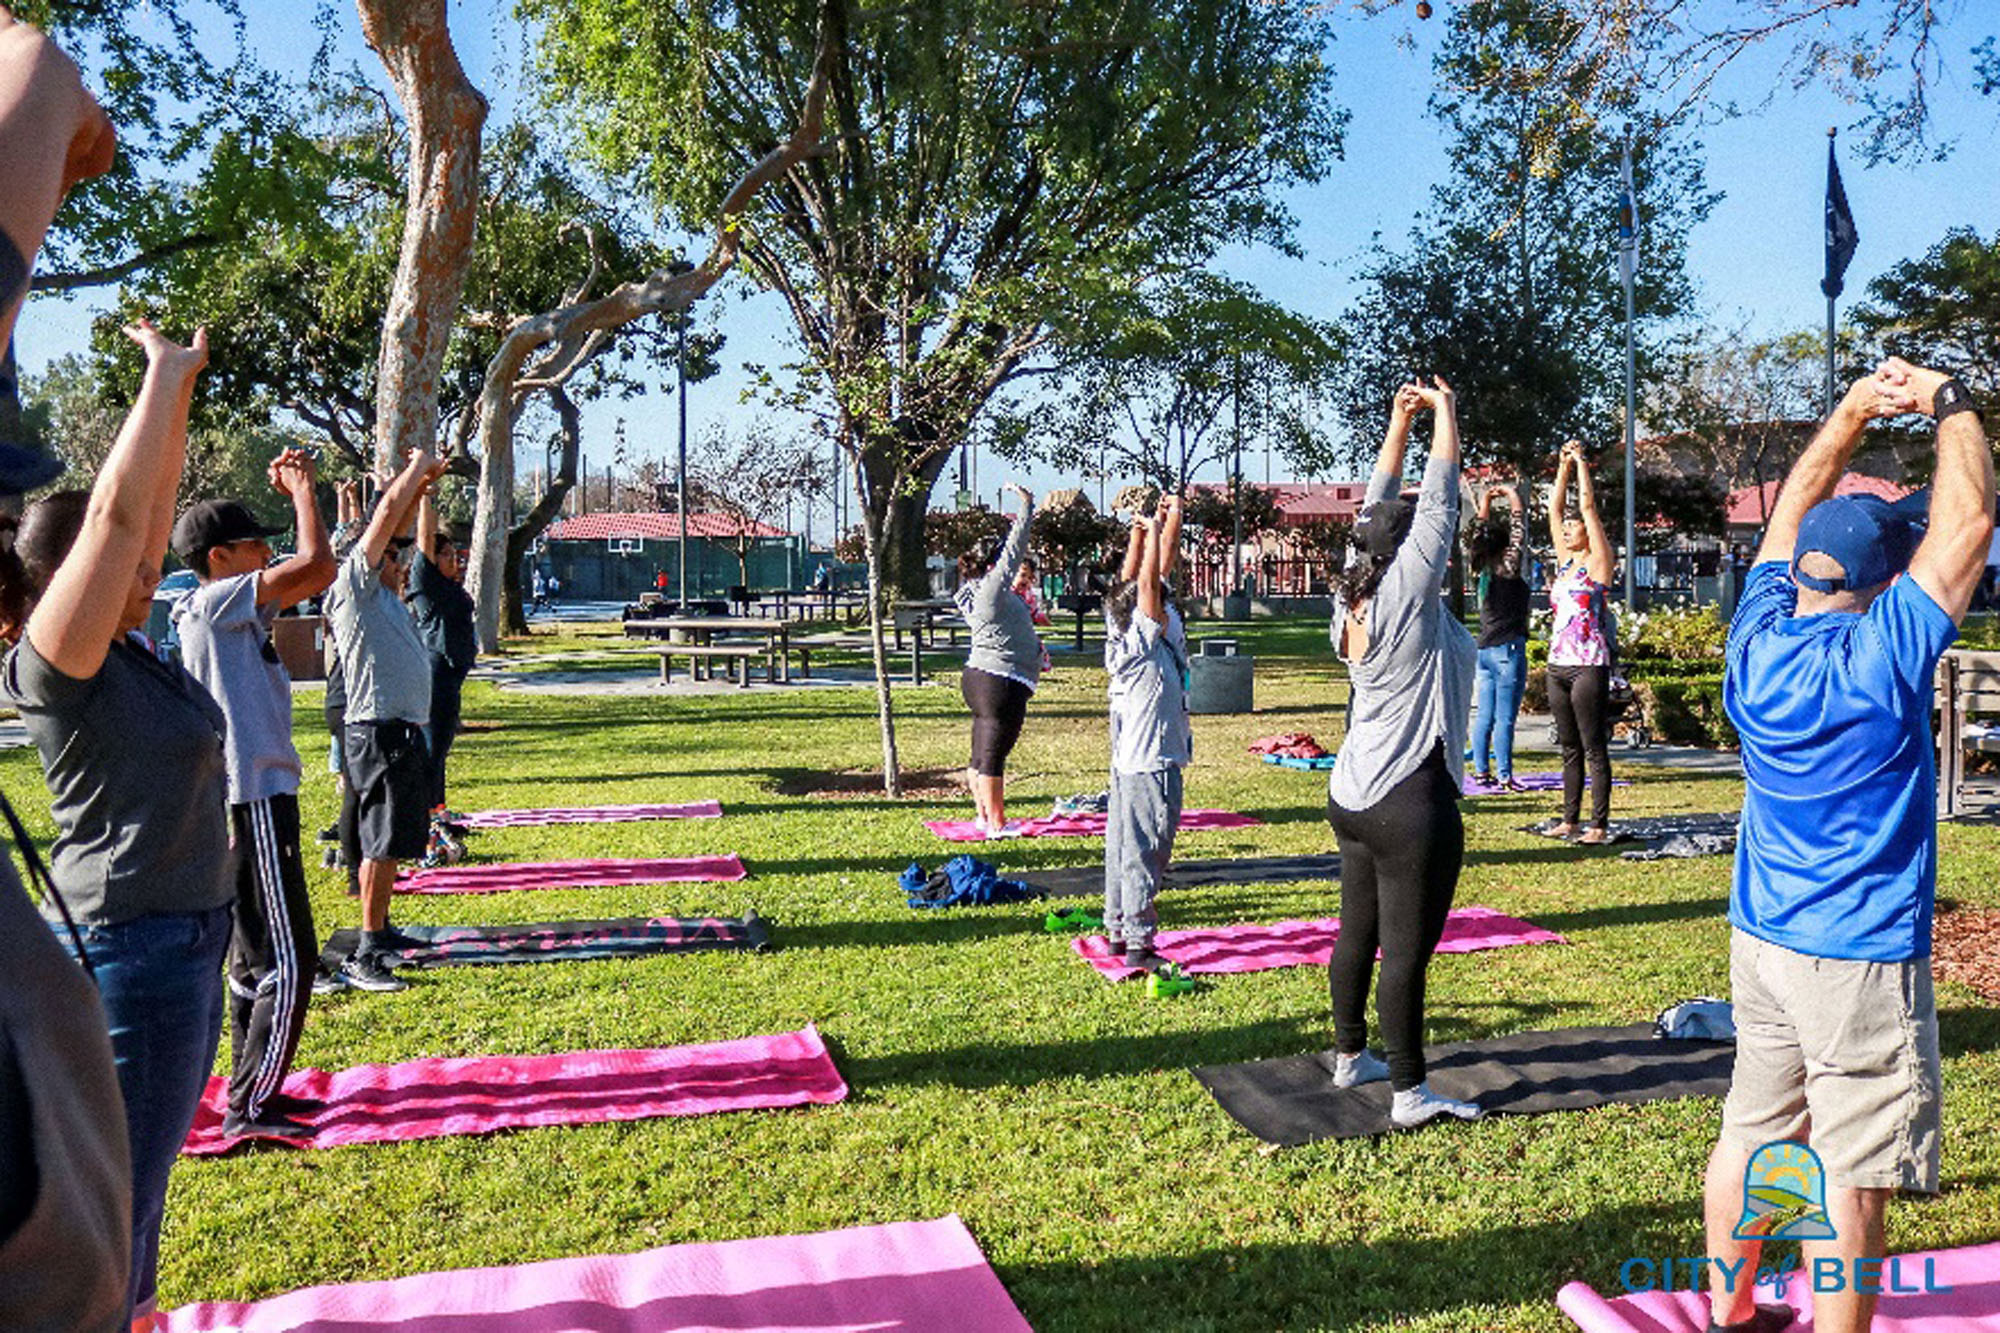 A group of people stretching during an outdoor yoga class with their yoga mats on the grass